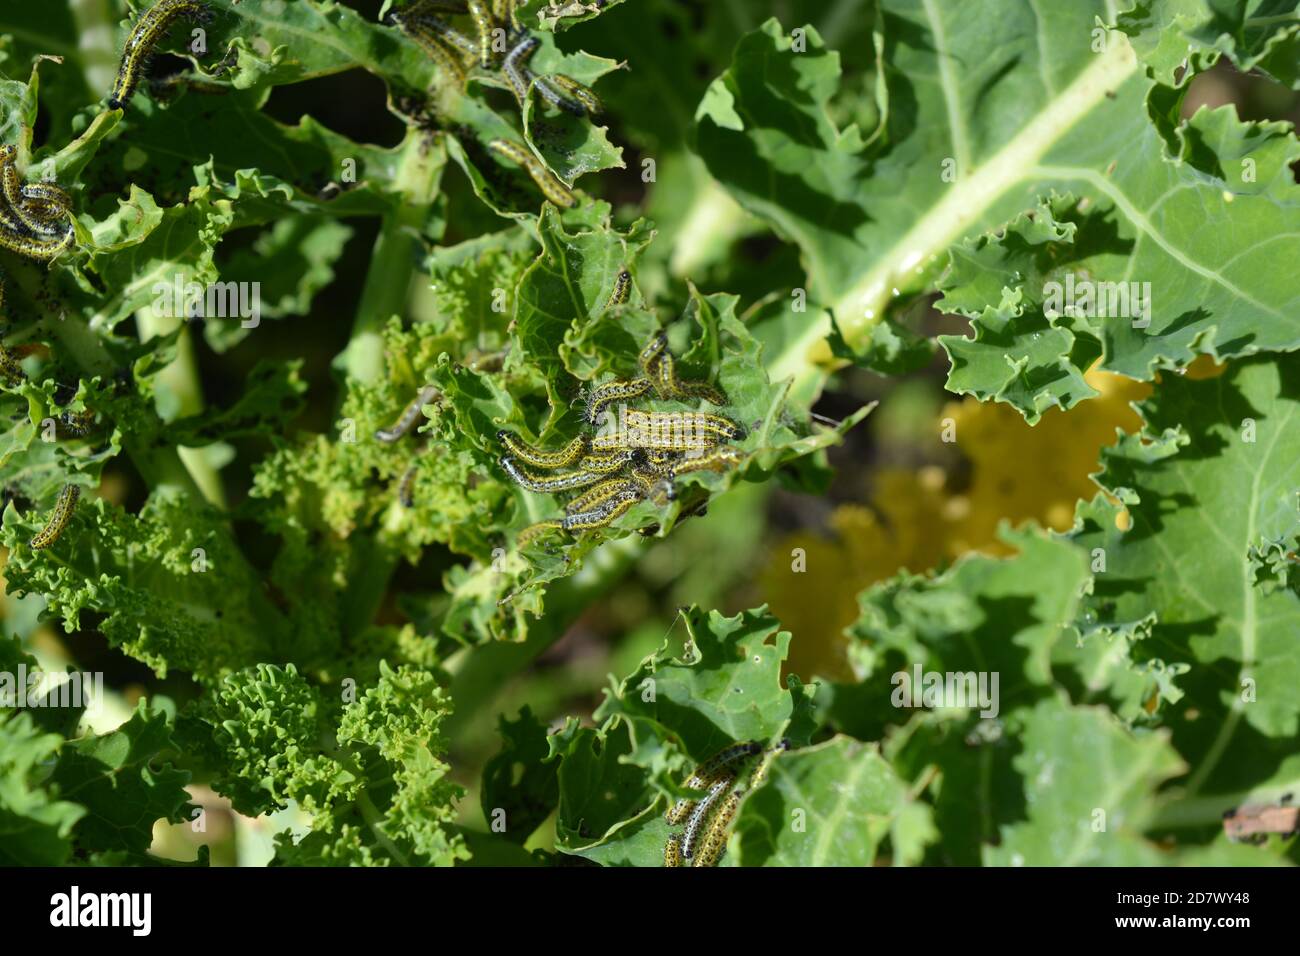 Cabbage White butterfly caterpillar infestation on curly kale in a vegetable patch Stock Photo